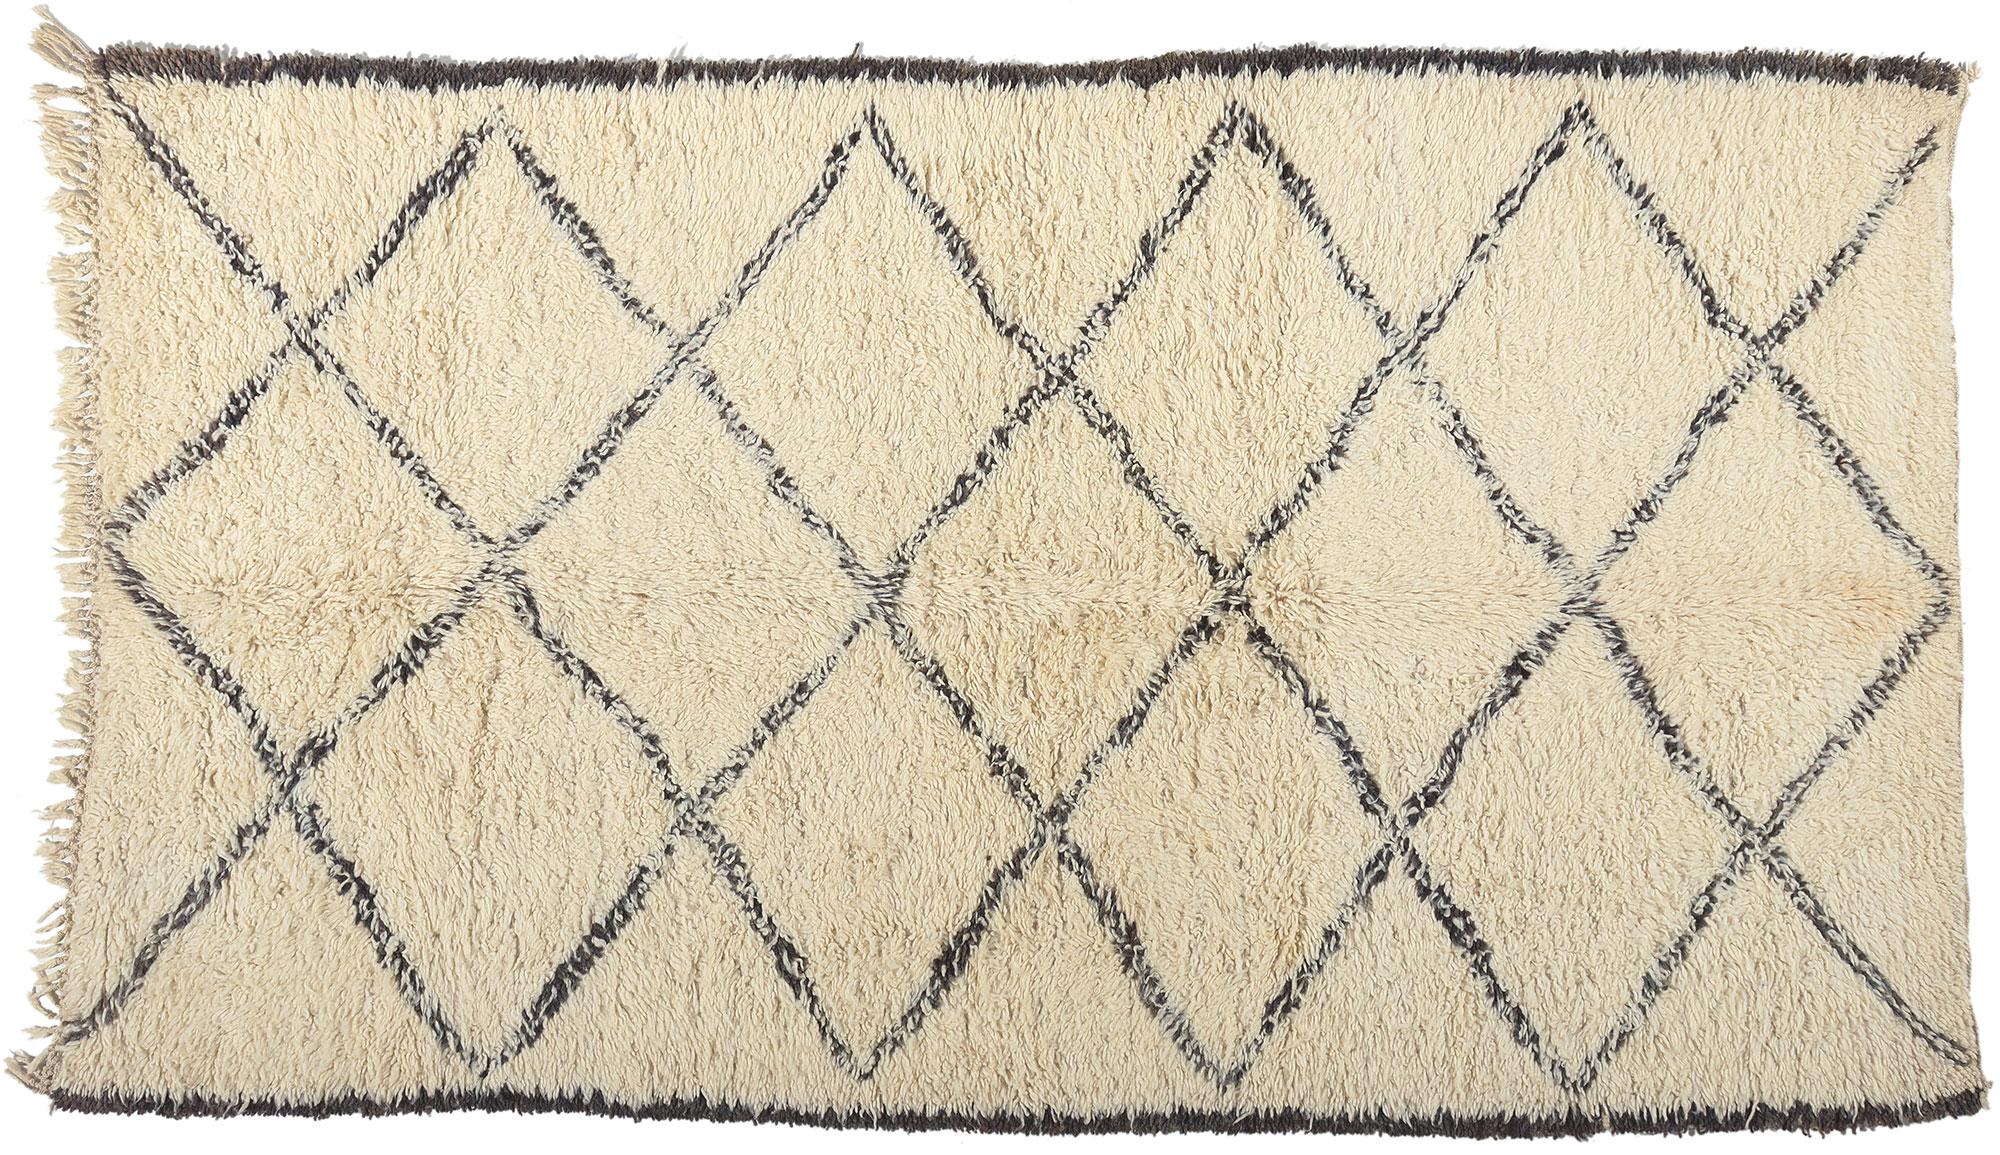 Vintage Moroccan Beni Ourain Rug, Midcentury Modern Meets Minimalist Style For Sale 3